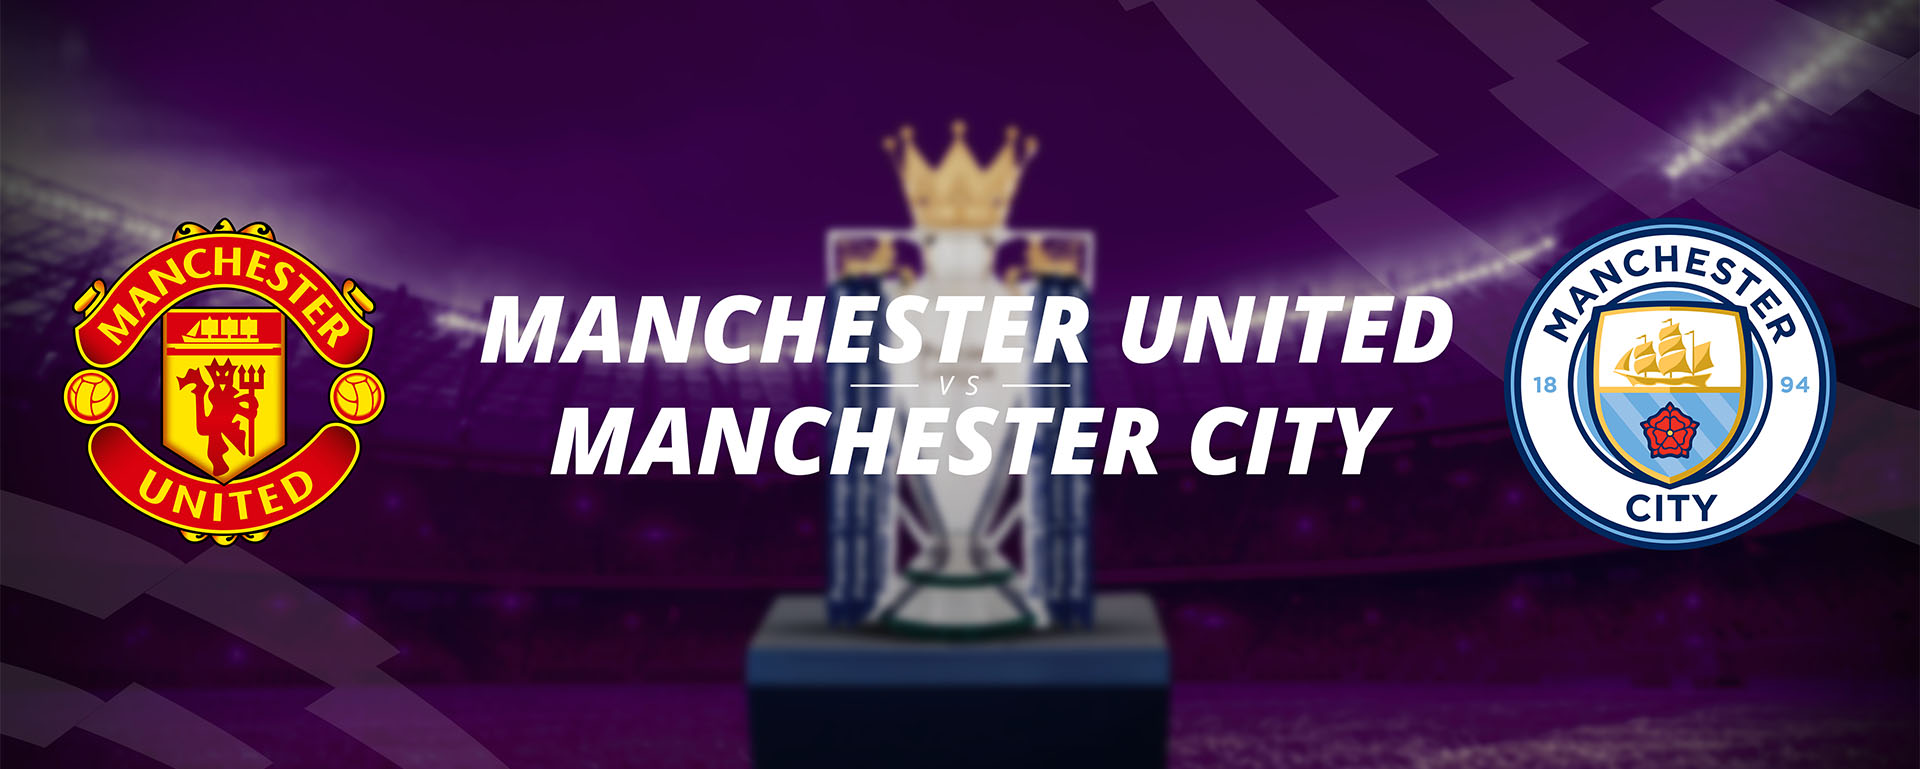 MANCHESTER UNITED VS MANCHESTER CITY: BETTING TIPS